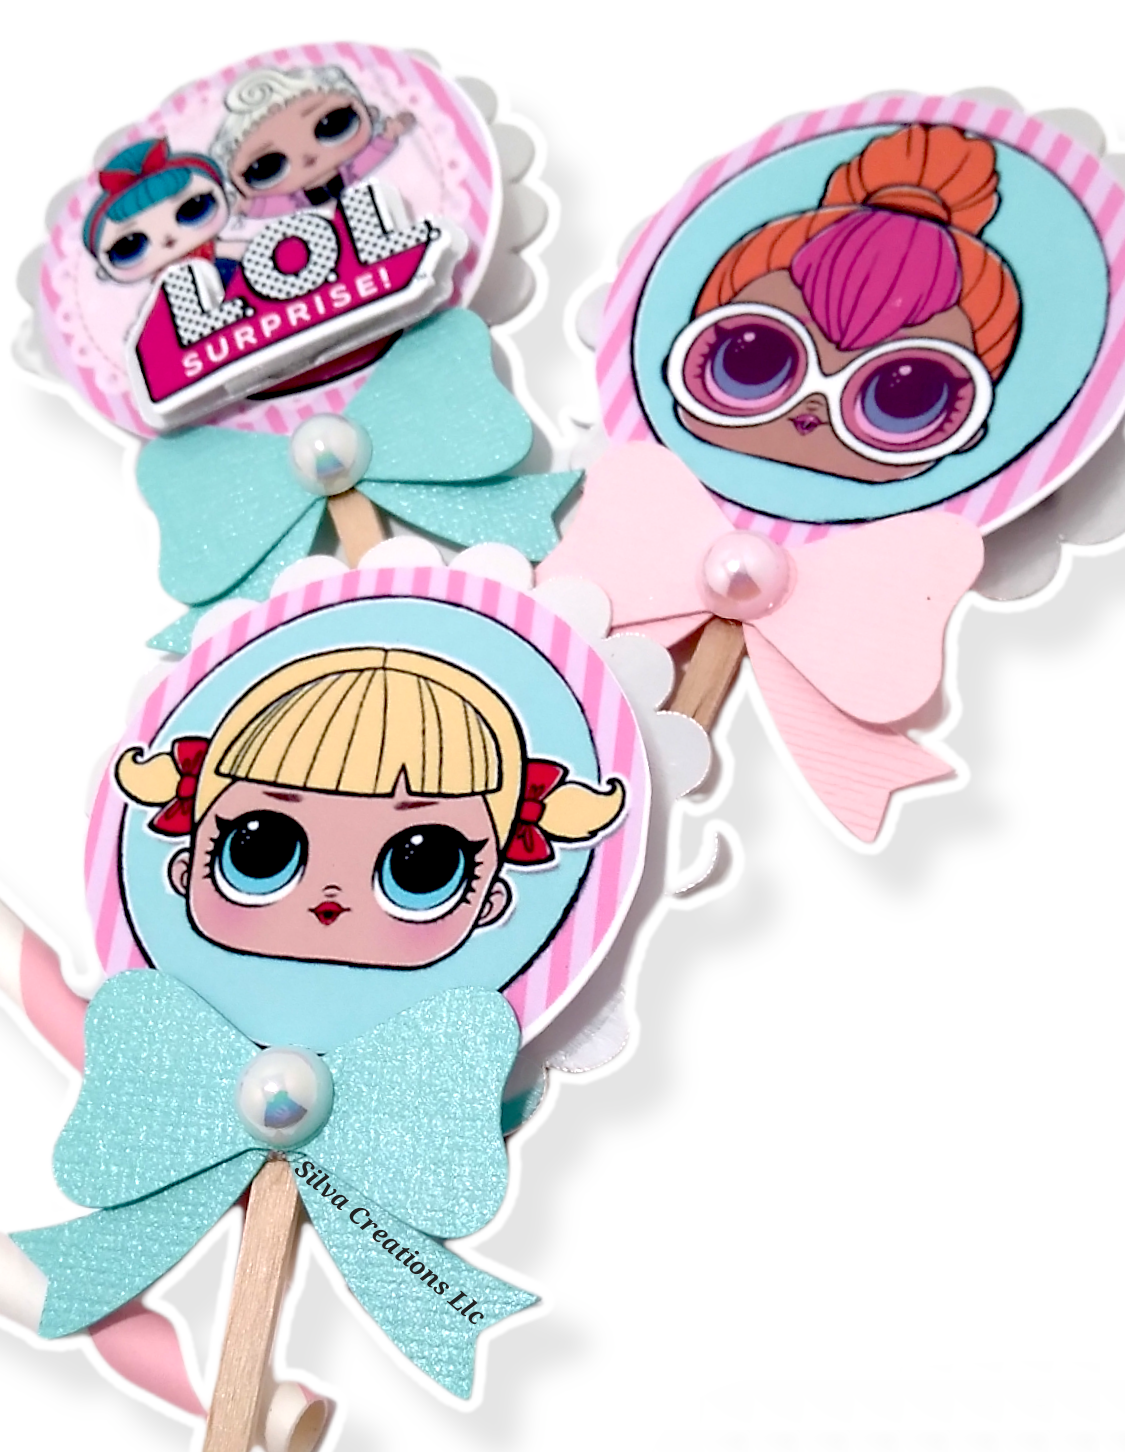 LOL dolls surprise inspired cupcake toppers - L.O.L doll cupcakes toppers - omg doll cupcakes toppers - lol doll cupcake picks.